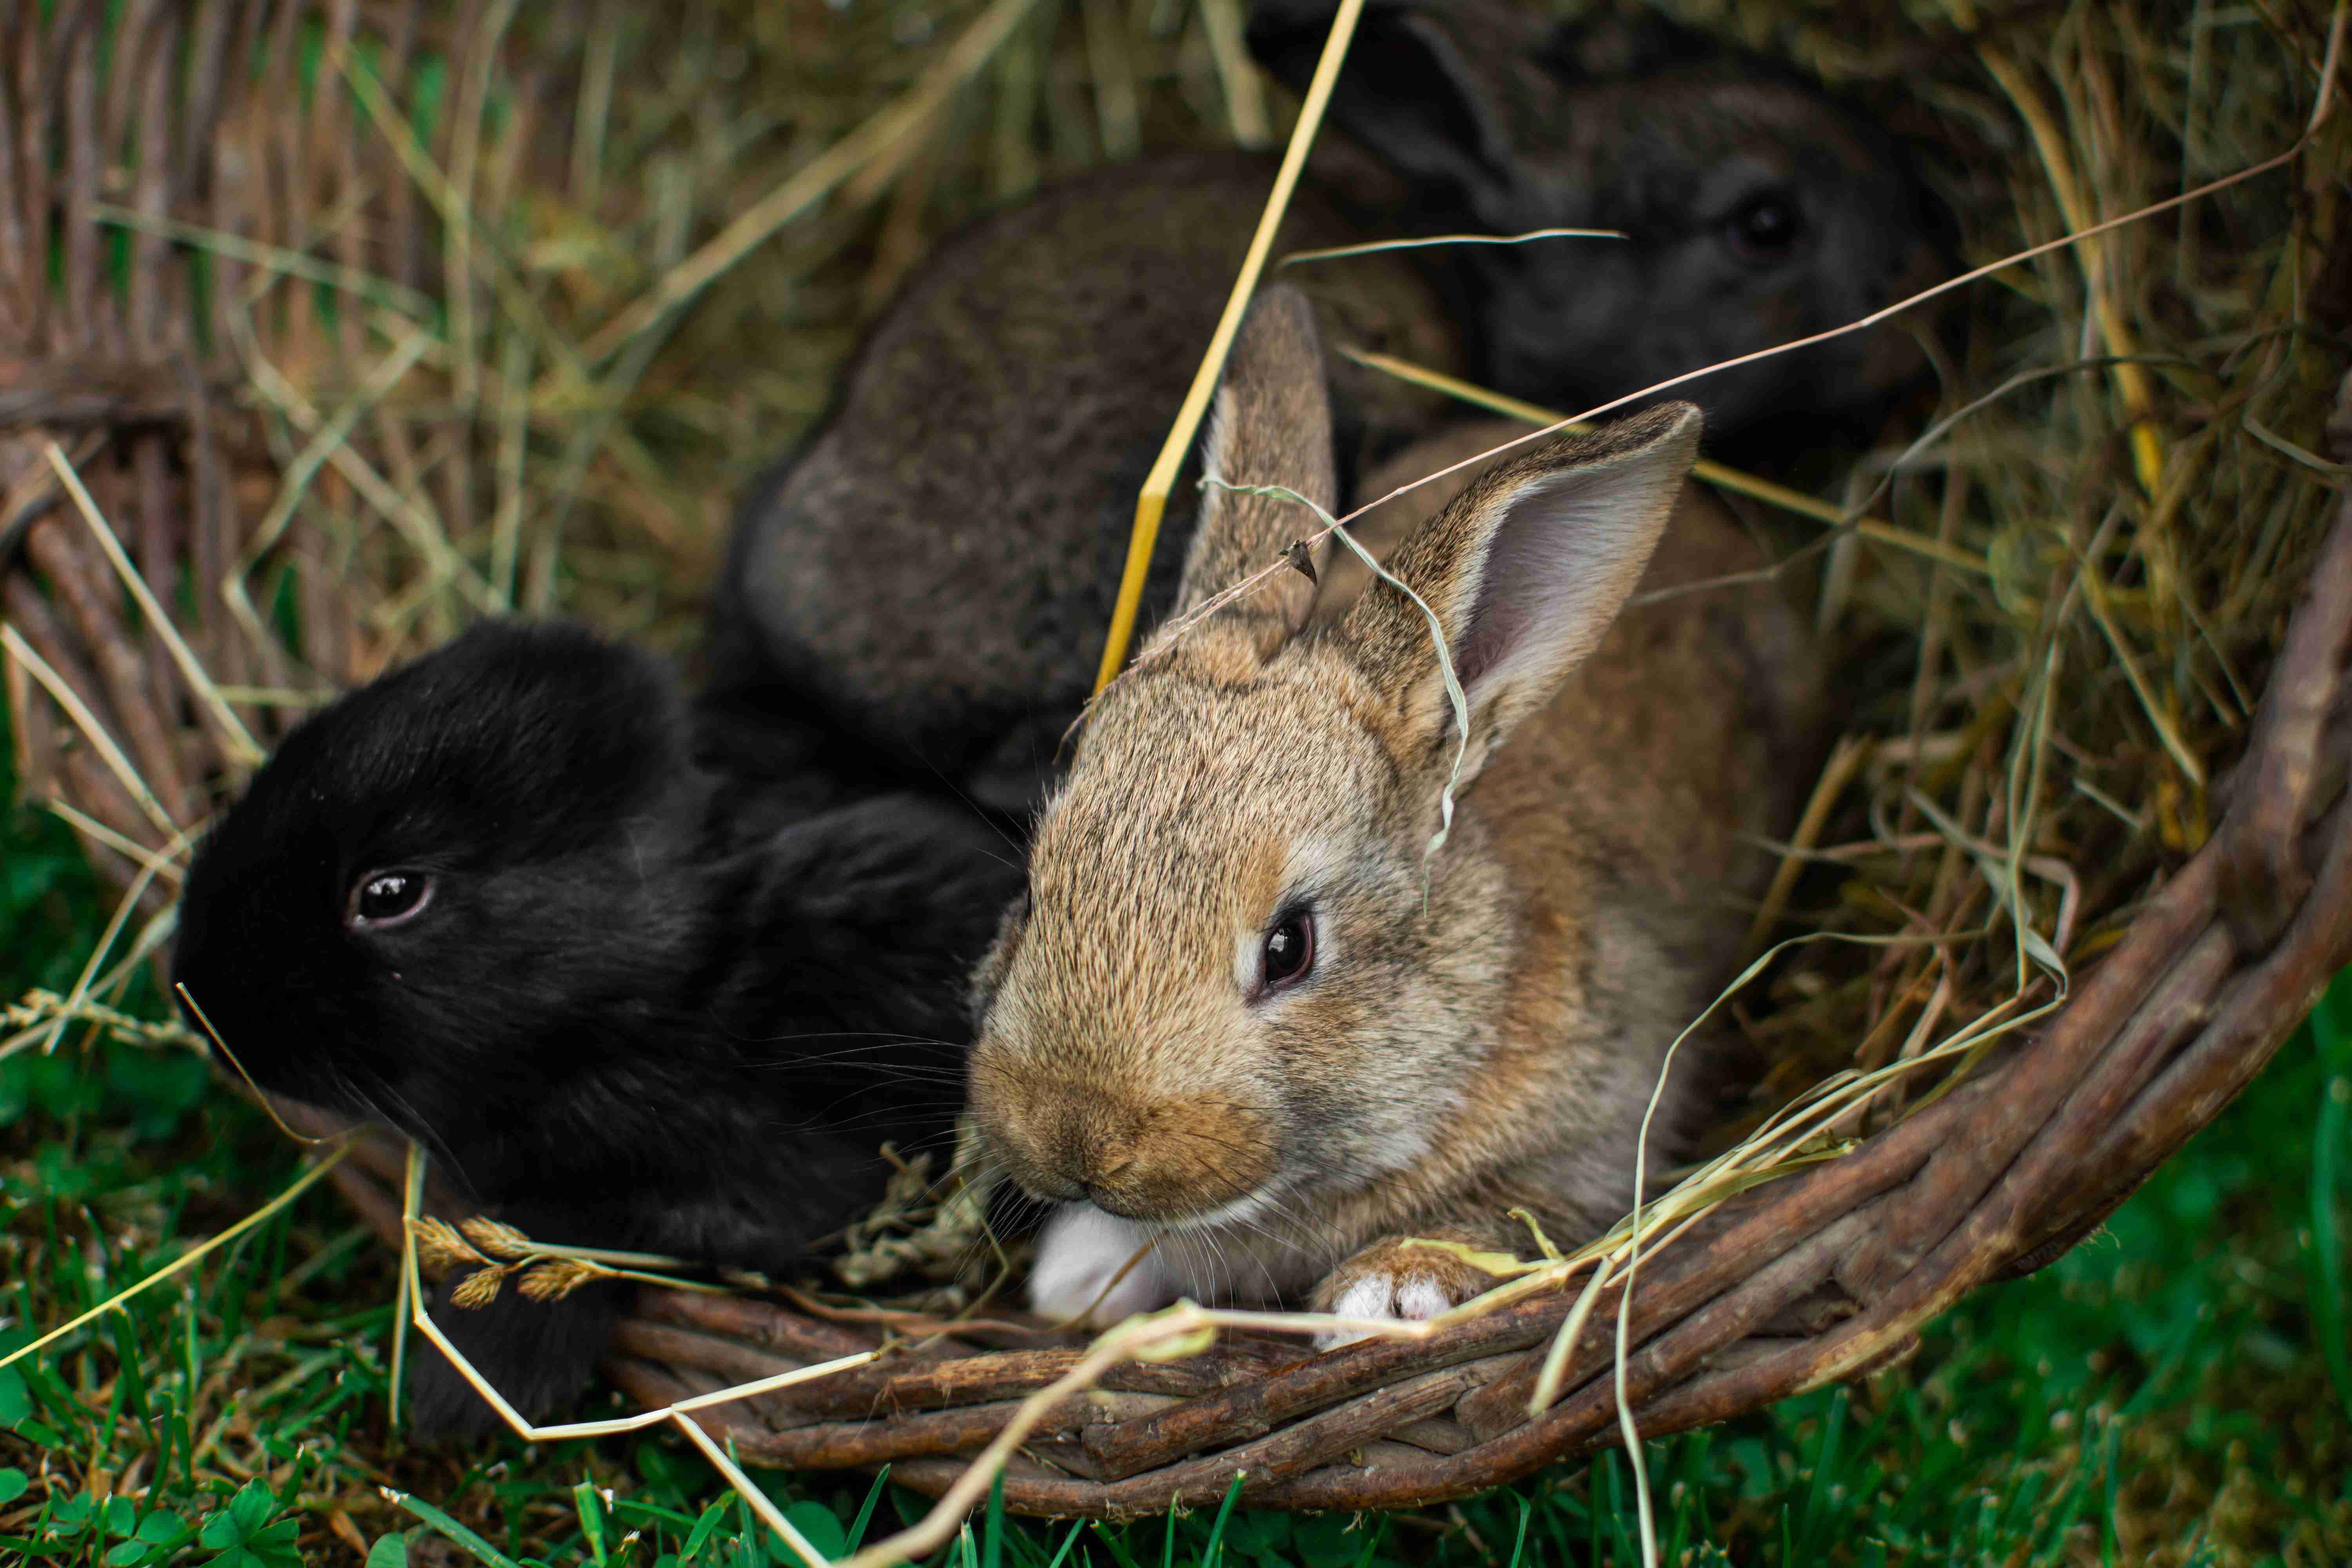 Training Your Rabbit: Can You Teach Them to Come When Called?